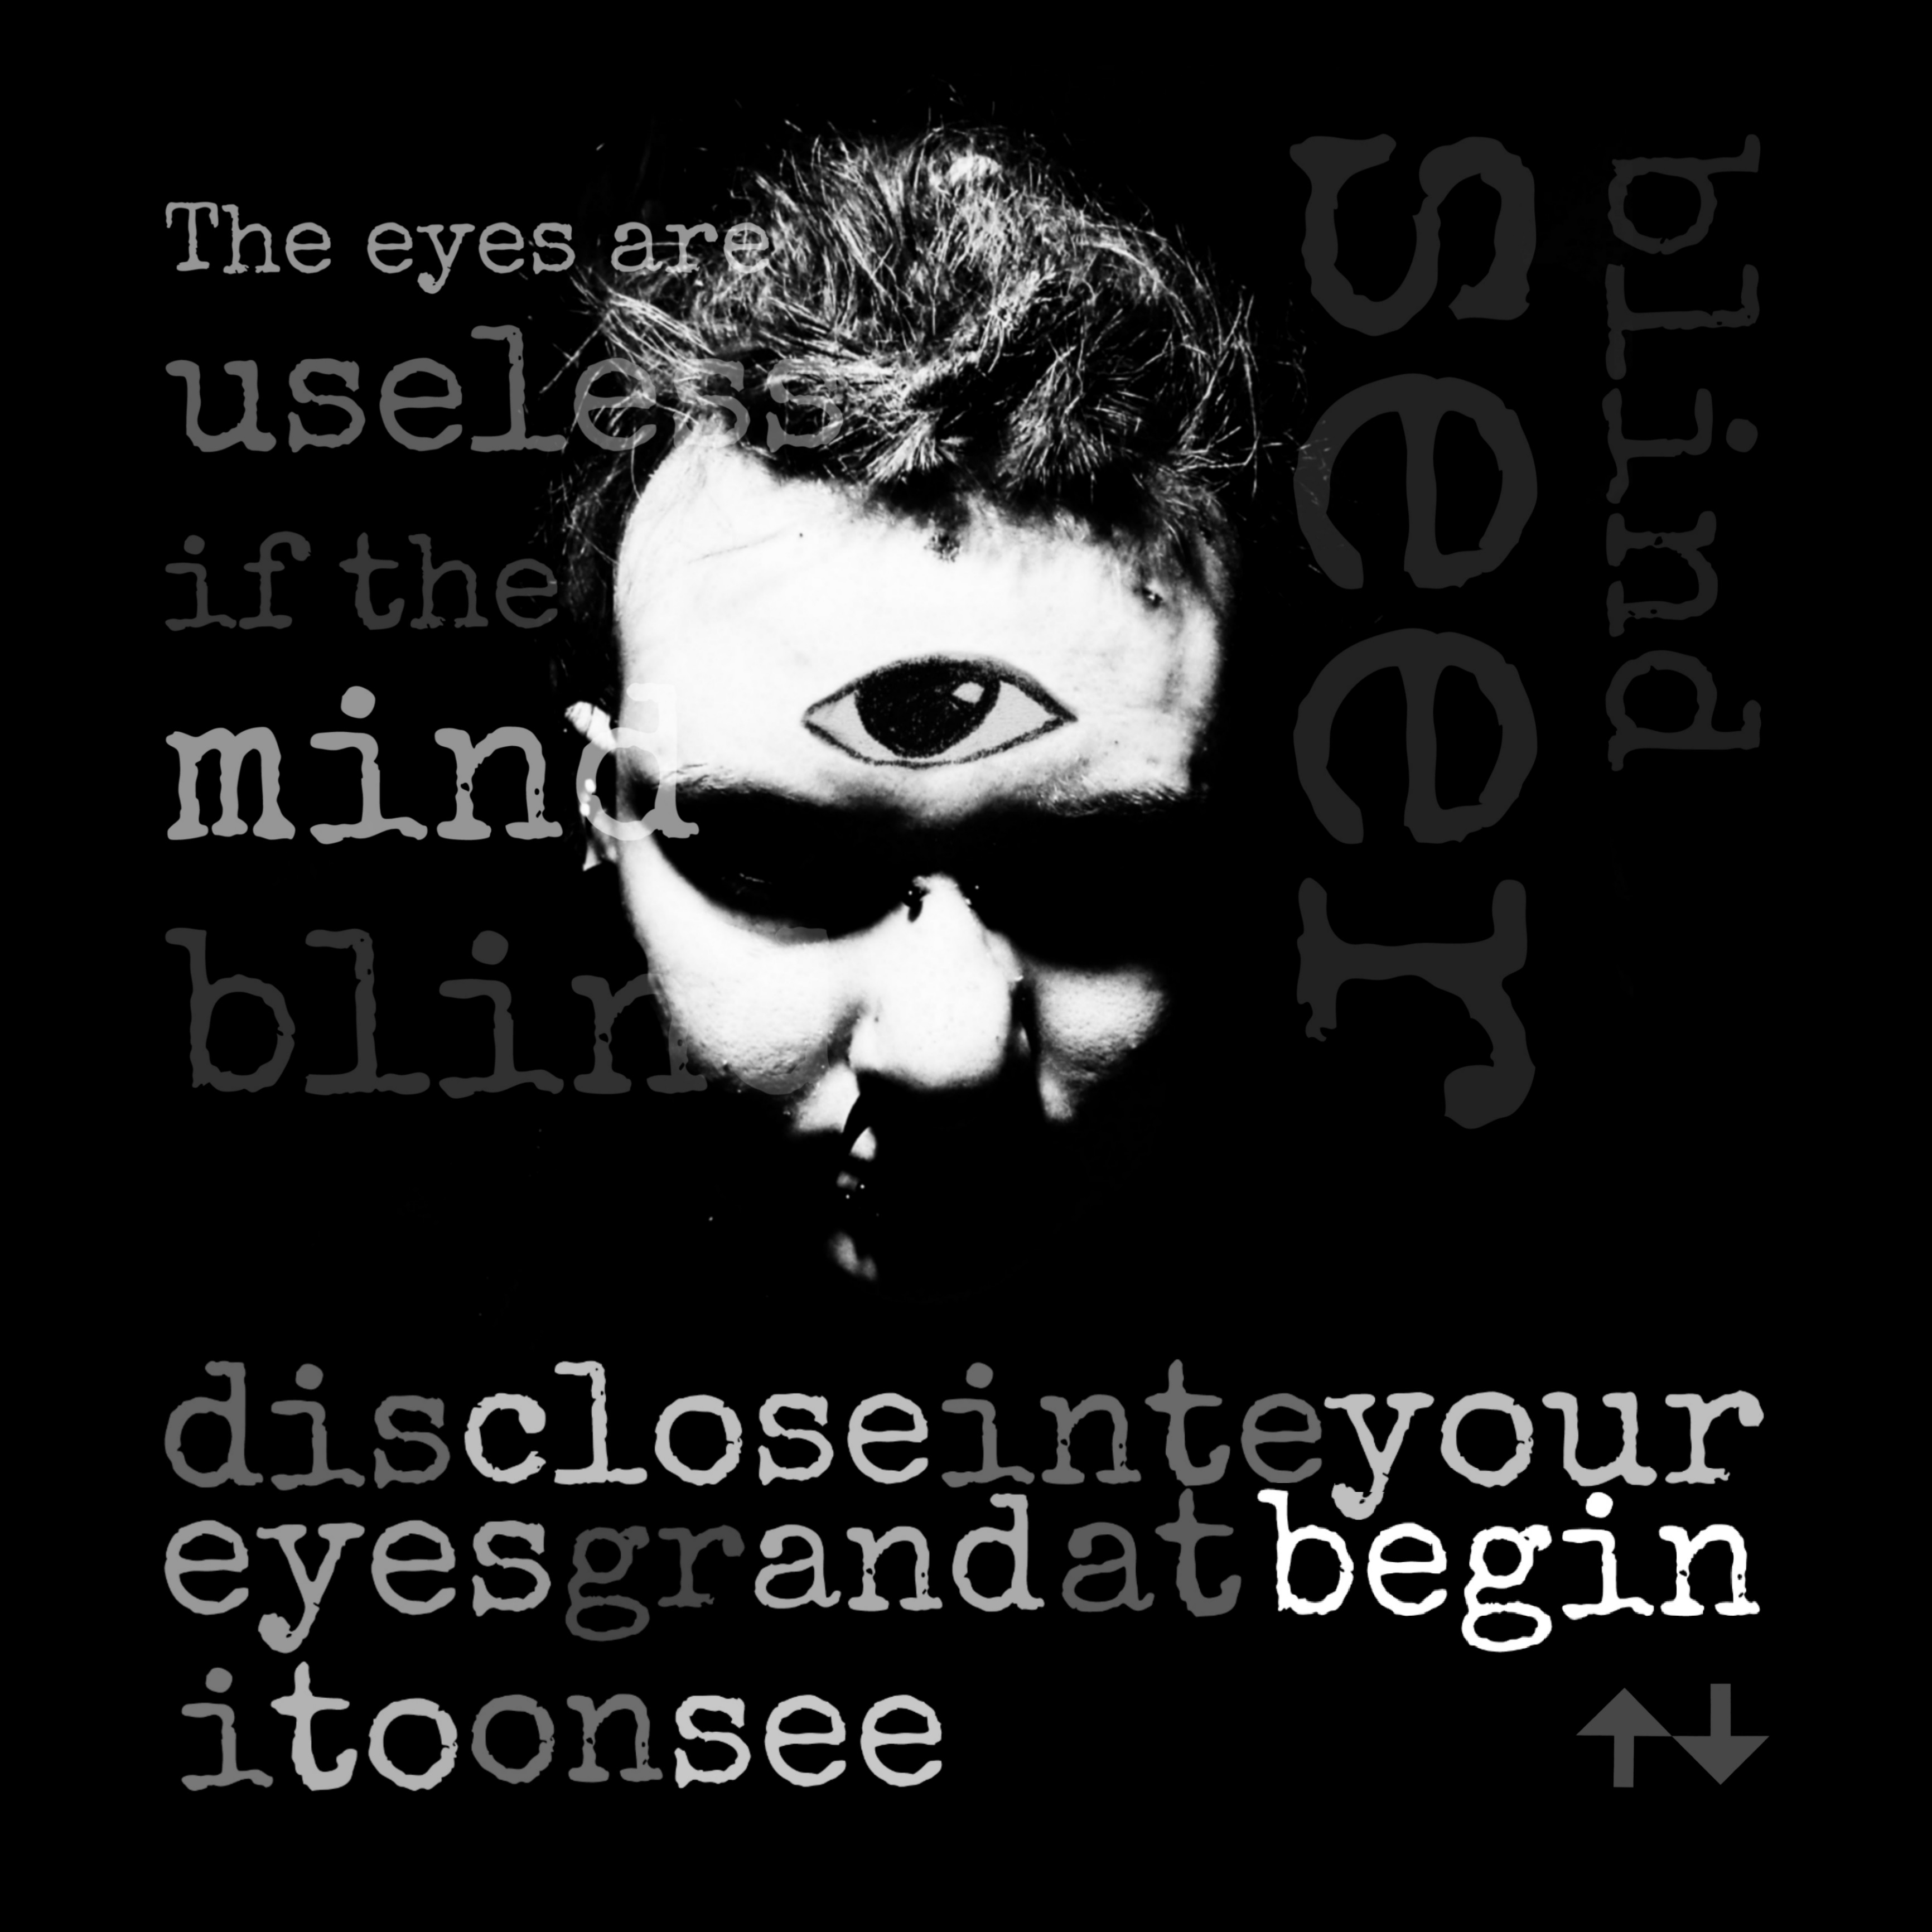 <b>The blind seer</b><br/><br/>What might appear paradox at first, isn't actually paradox at all, for a seer doesn't "see" with their eyes, but with their mind.<br/>The world we do inhabit consists of far more than what we are only limited to see; I don't mean it in a particular spiritual sense, but in the fact that when we come to understand this world, the things in it, and also ourselves, we are able to construct a far larger big picture than we are limited by using solely our eyes.<br/>This world is fascinating, and why shouldn't we be curious about finding "what the world holds together in its innermost", as to quote Goethe?<br/><br/><i>Hence, close your eyes and begin to see...<br/>The eyes are useless if the mind is blind...</i><br/>Let your mind wander for curiosity has its reason for existing. Why should nature gift us with the blessing of complex consciousness, if we couldn't use it?